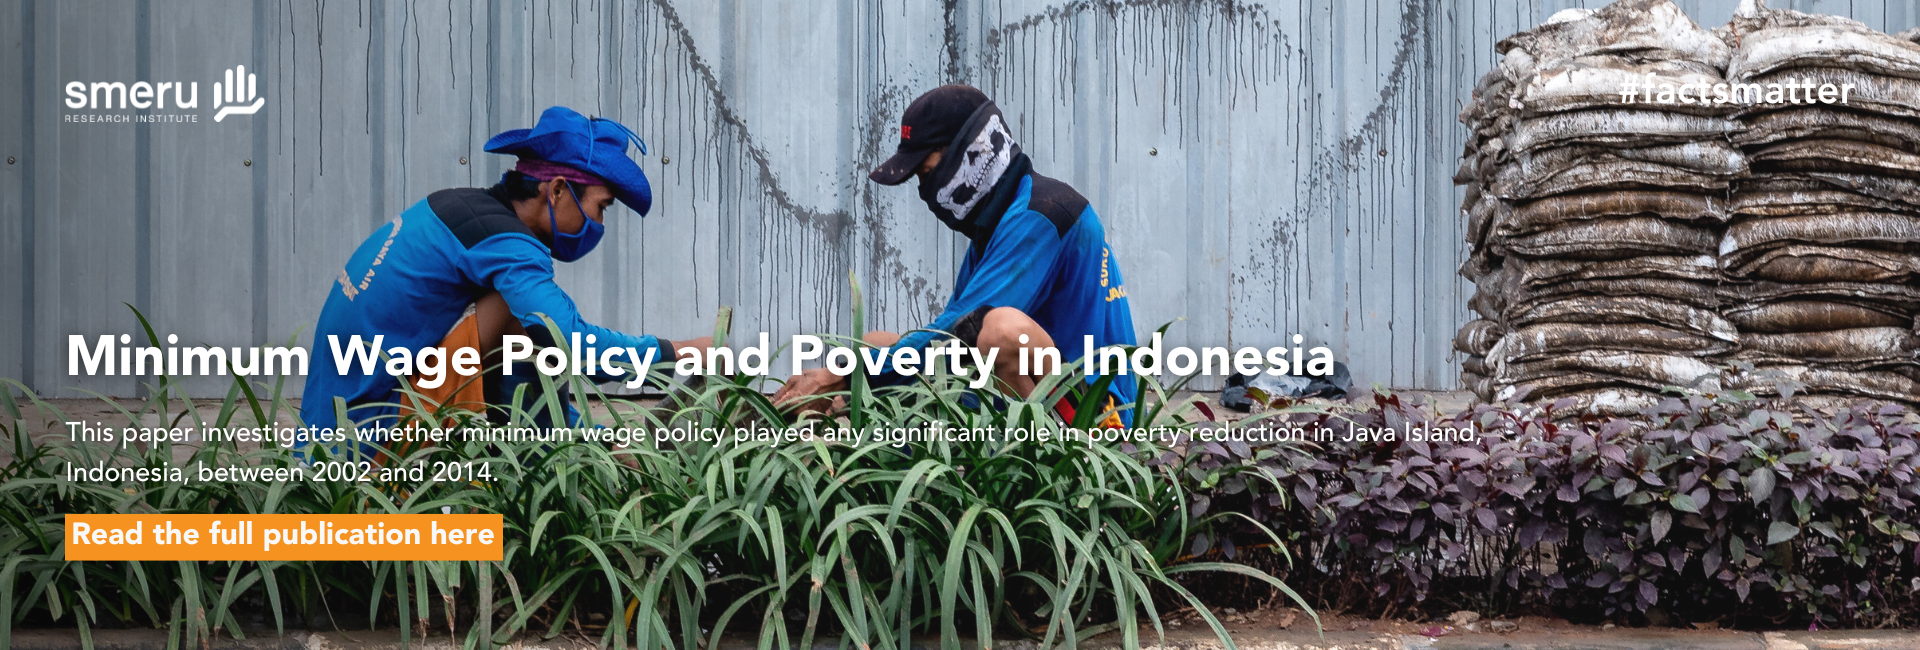 Minimum Wage Policy and Poverty in Indonesia